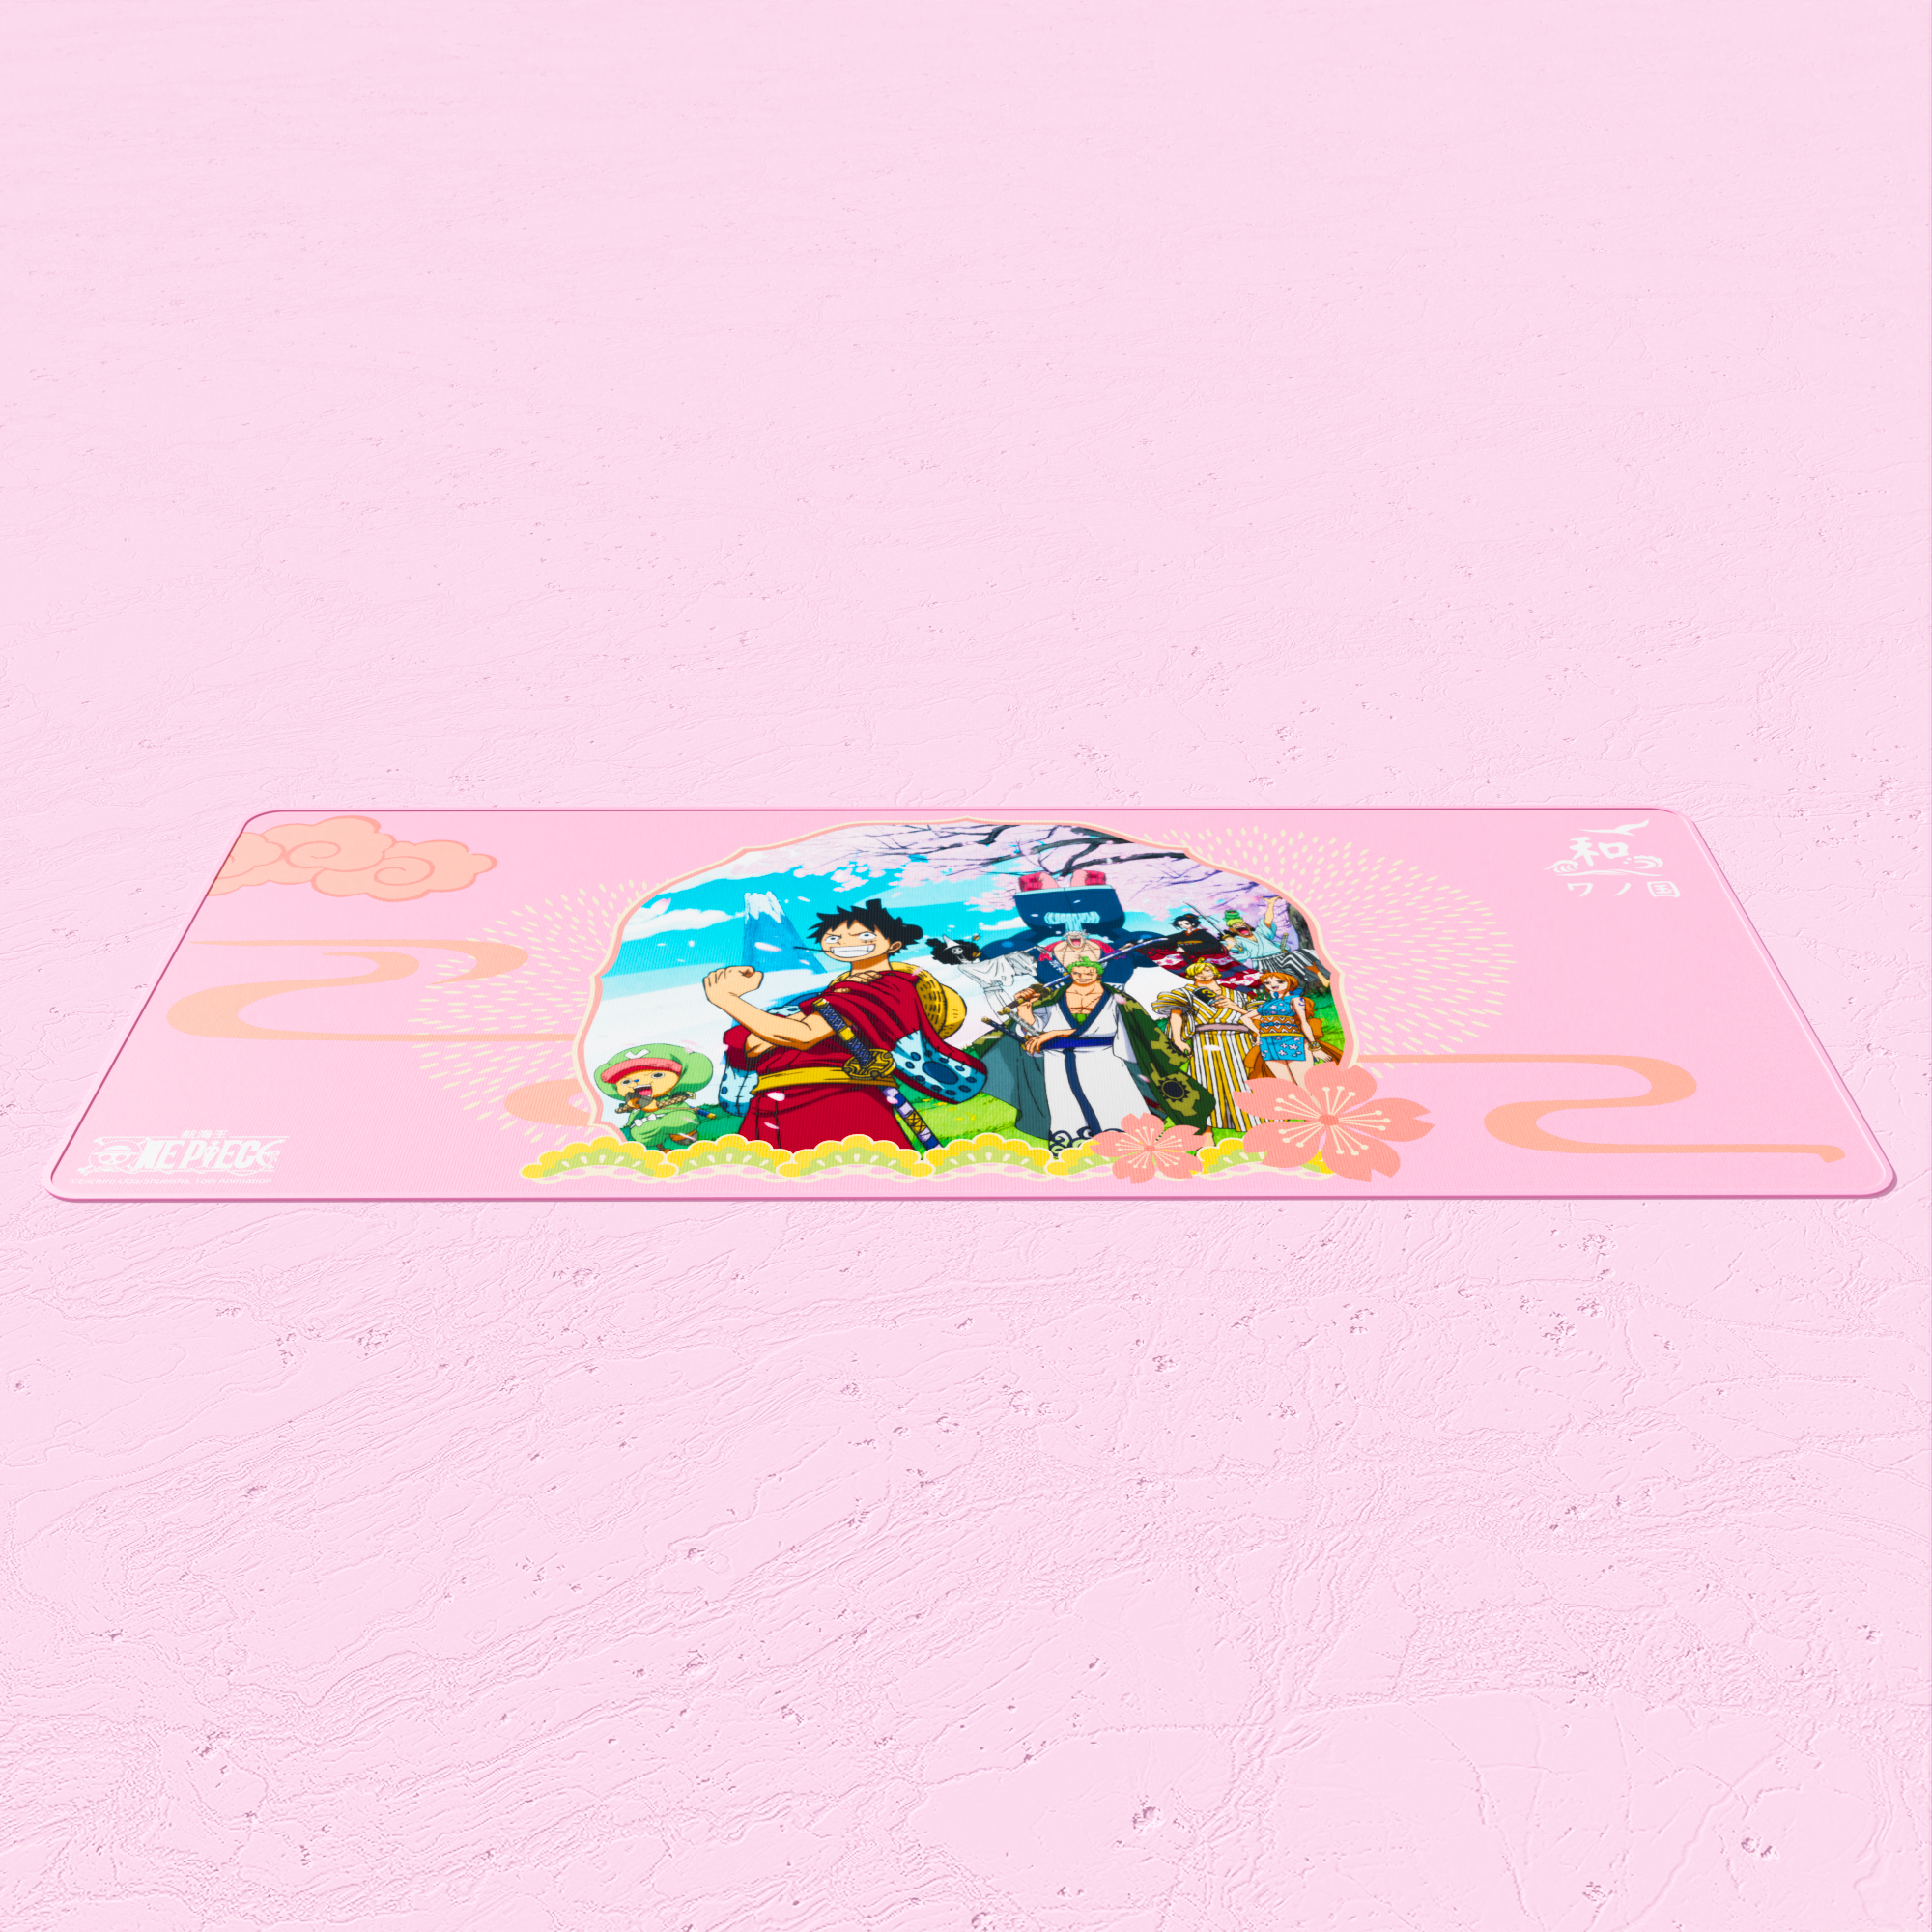 One Piece Wano Country Mouse pad